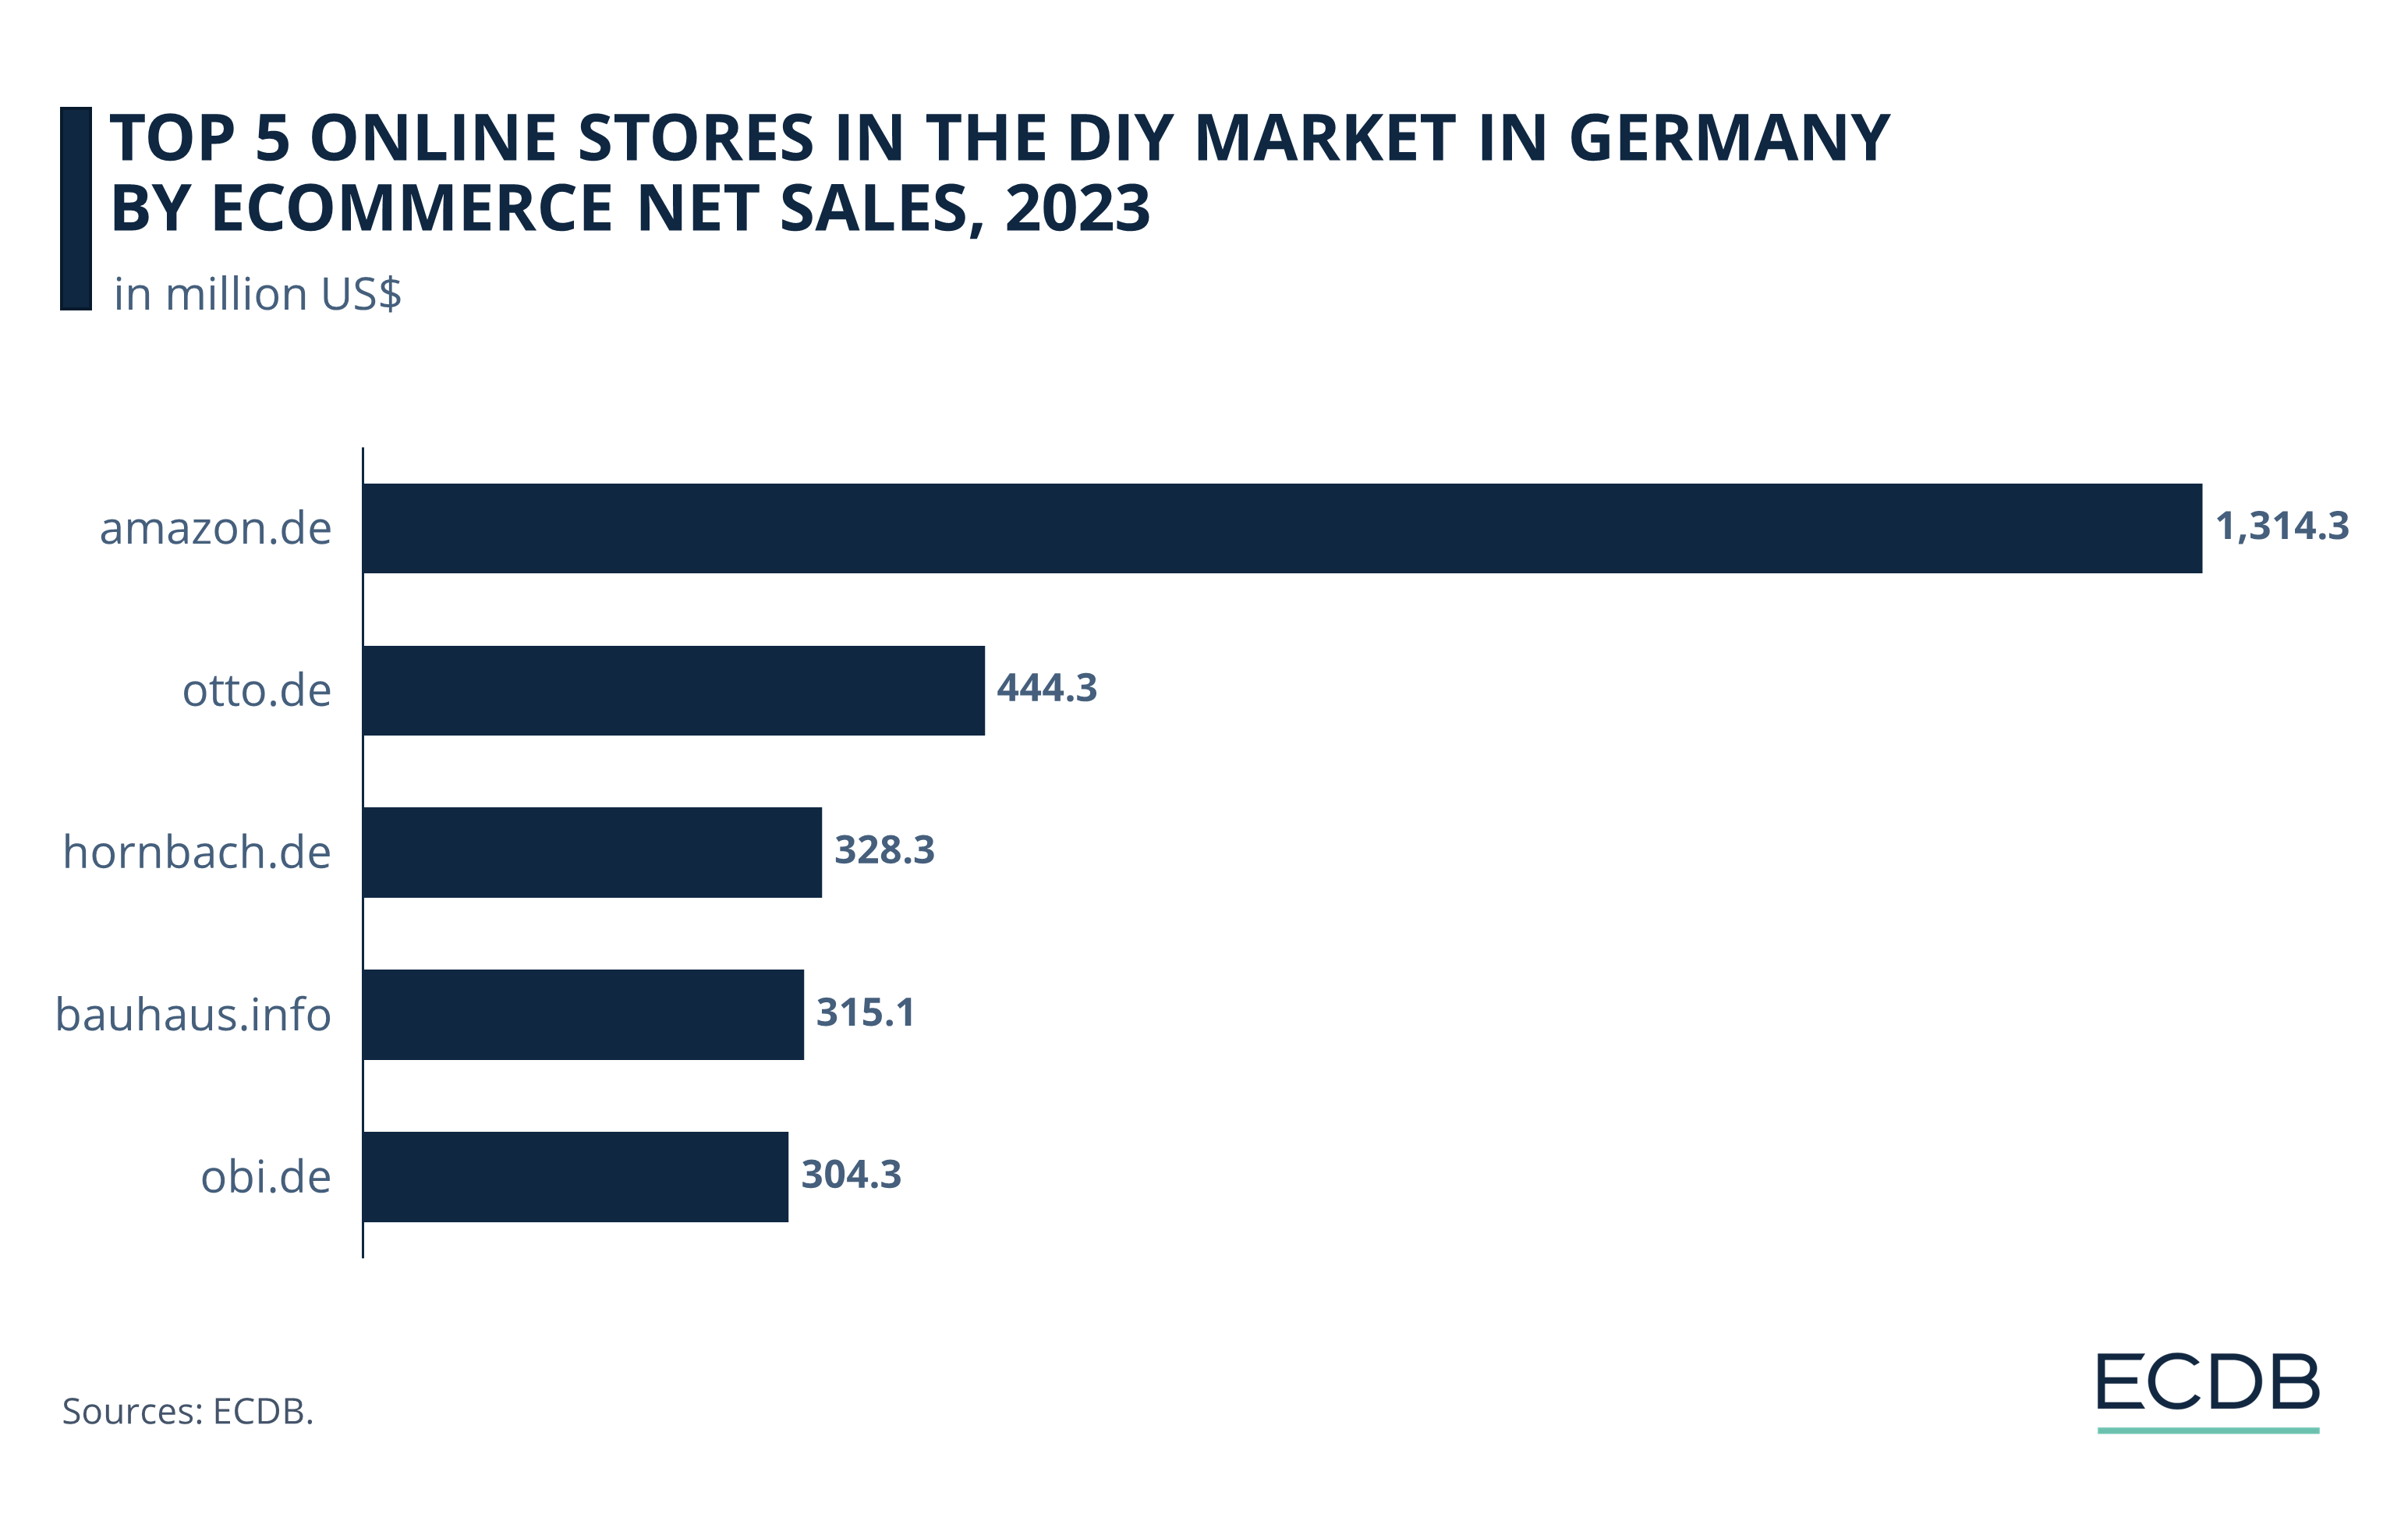 Top 5 Online Stores in the DIY Market in Germany by eCommerce Net Sales, 2022